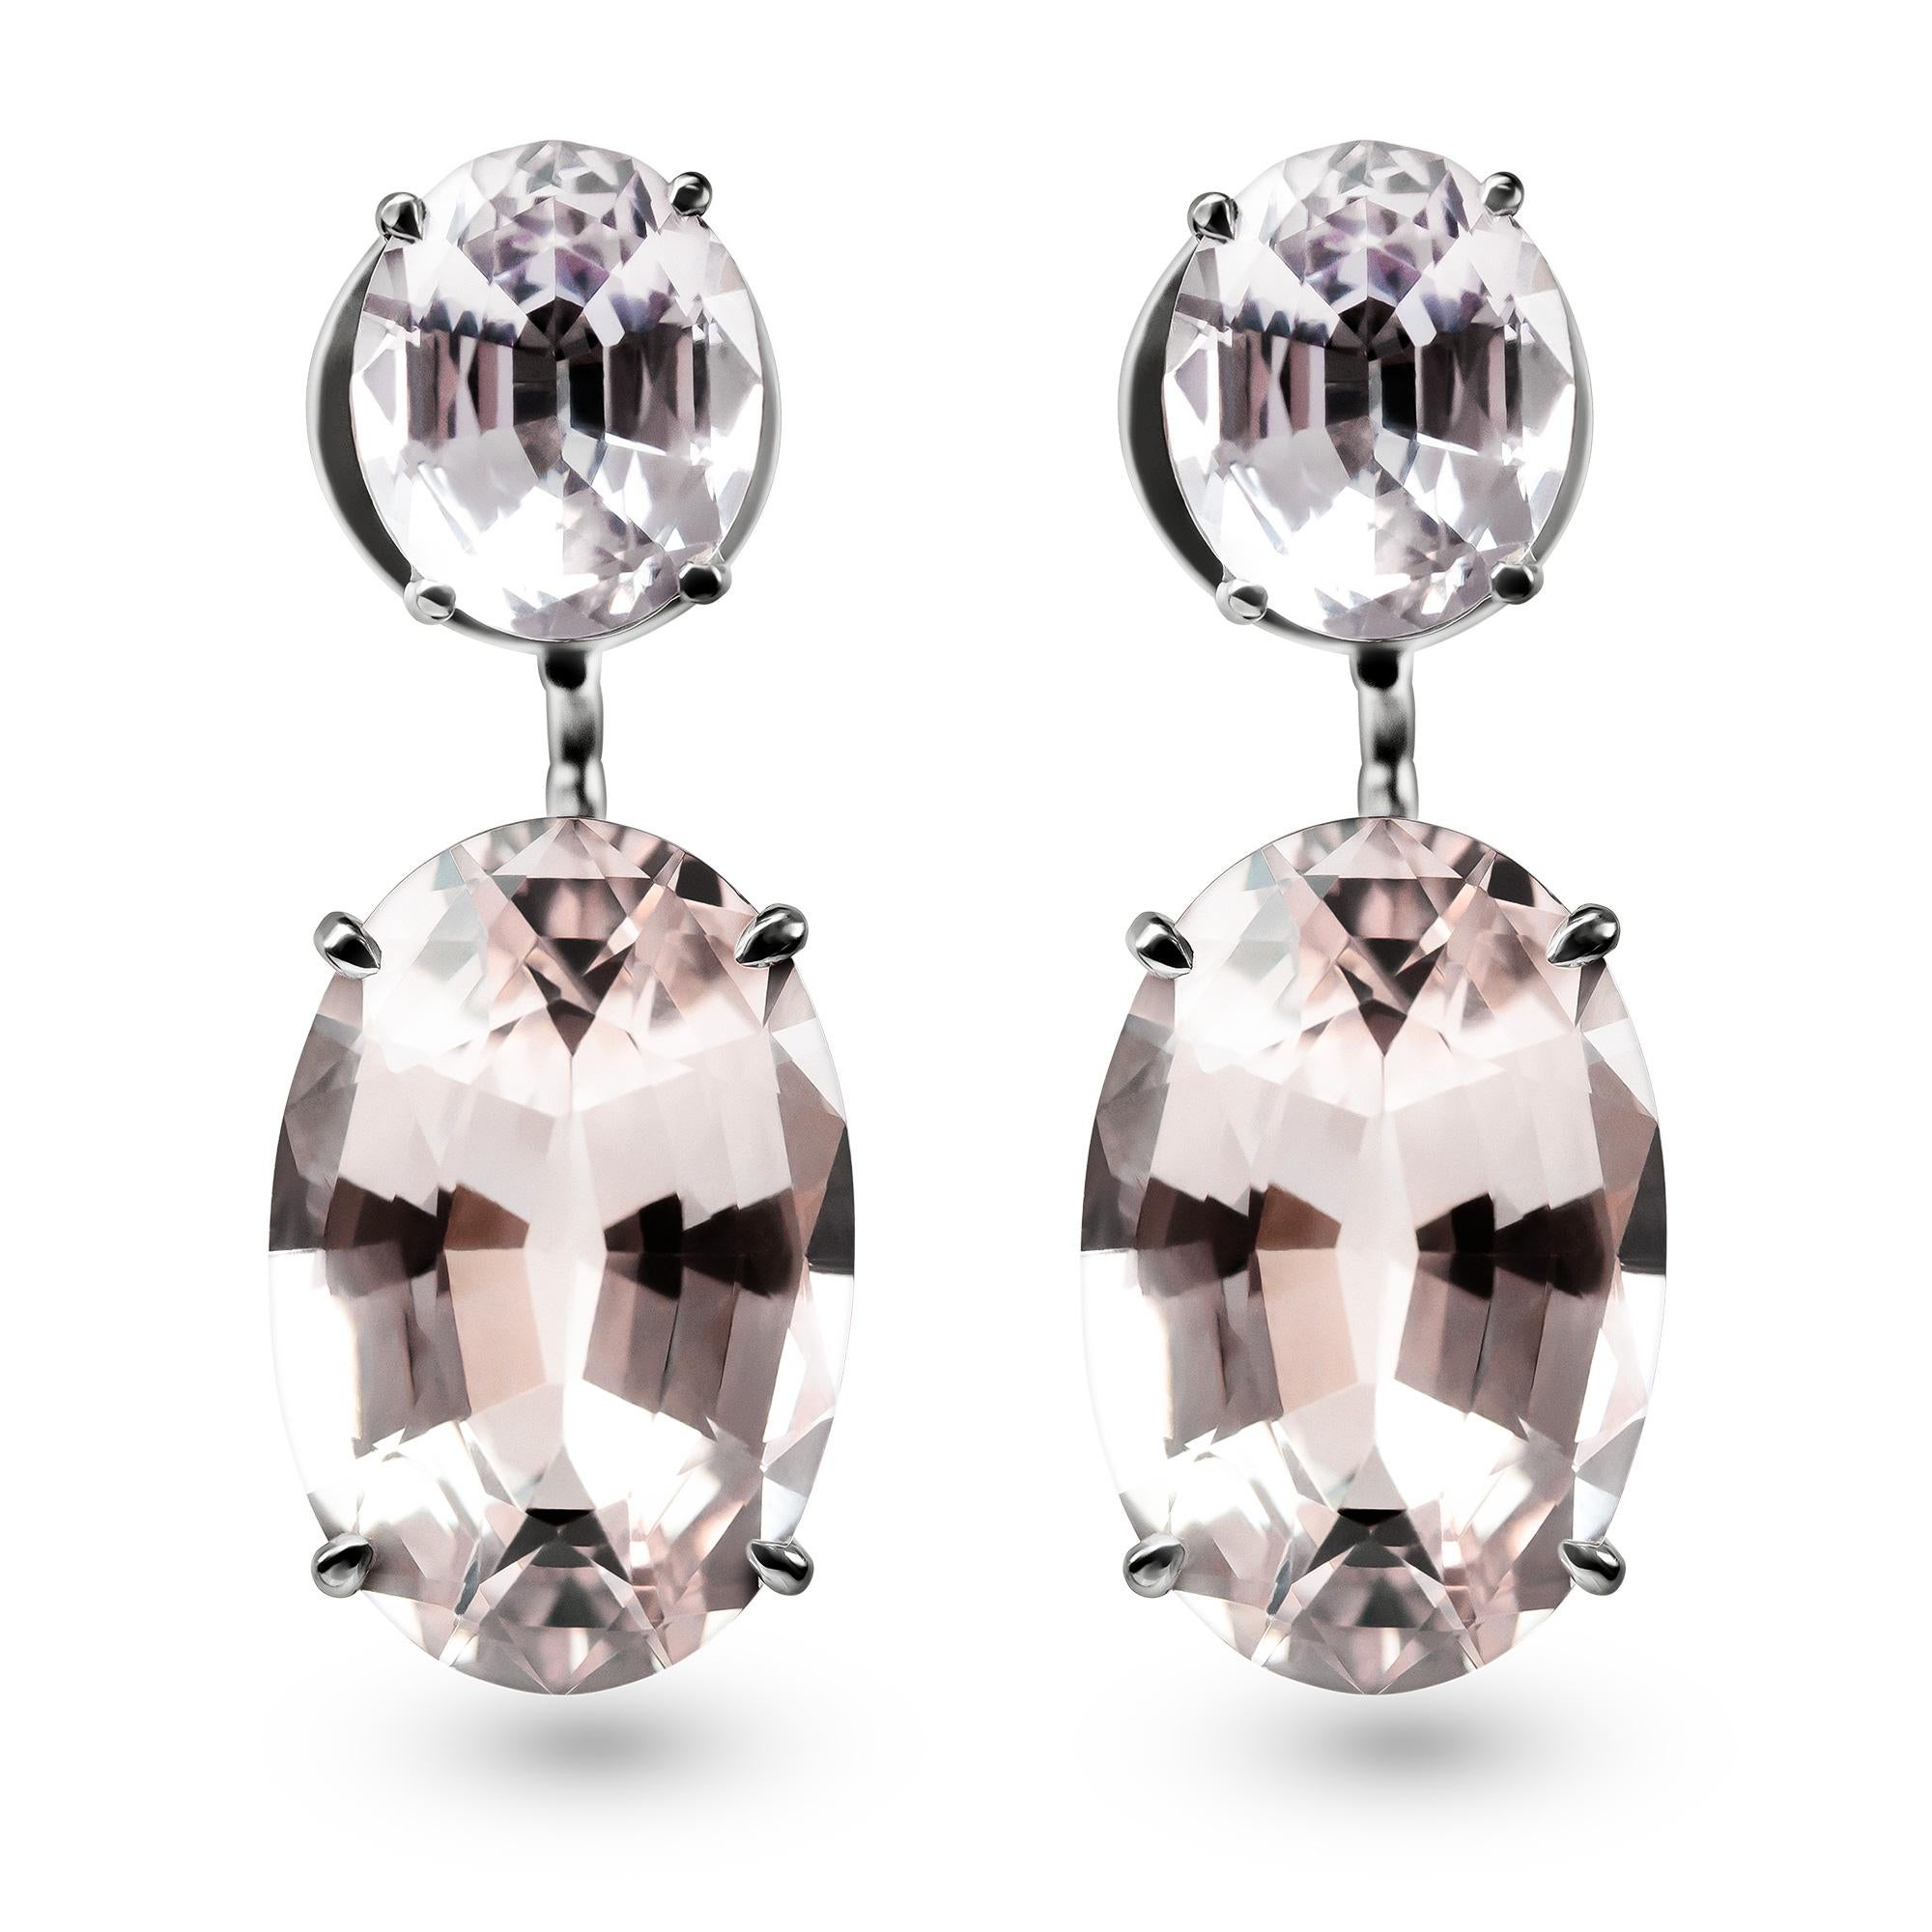 Enairo Morganite 18k Gold Drop Earrings

A contemporary 18k gold pair of earrings set with:

- Oval pairs 8.02 Carat Morganite
- Oval pairs 32 Carat Morganite

Weight of one earring: 11.5 gr
